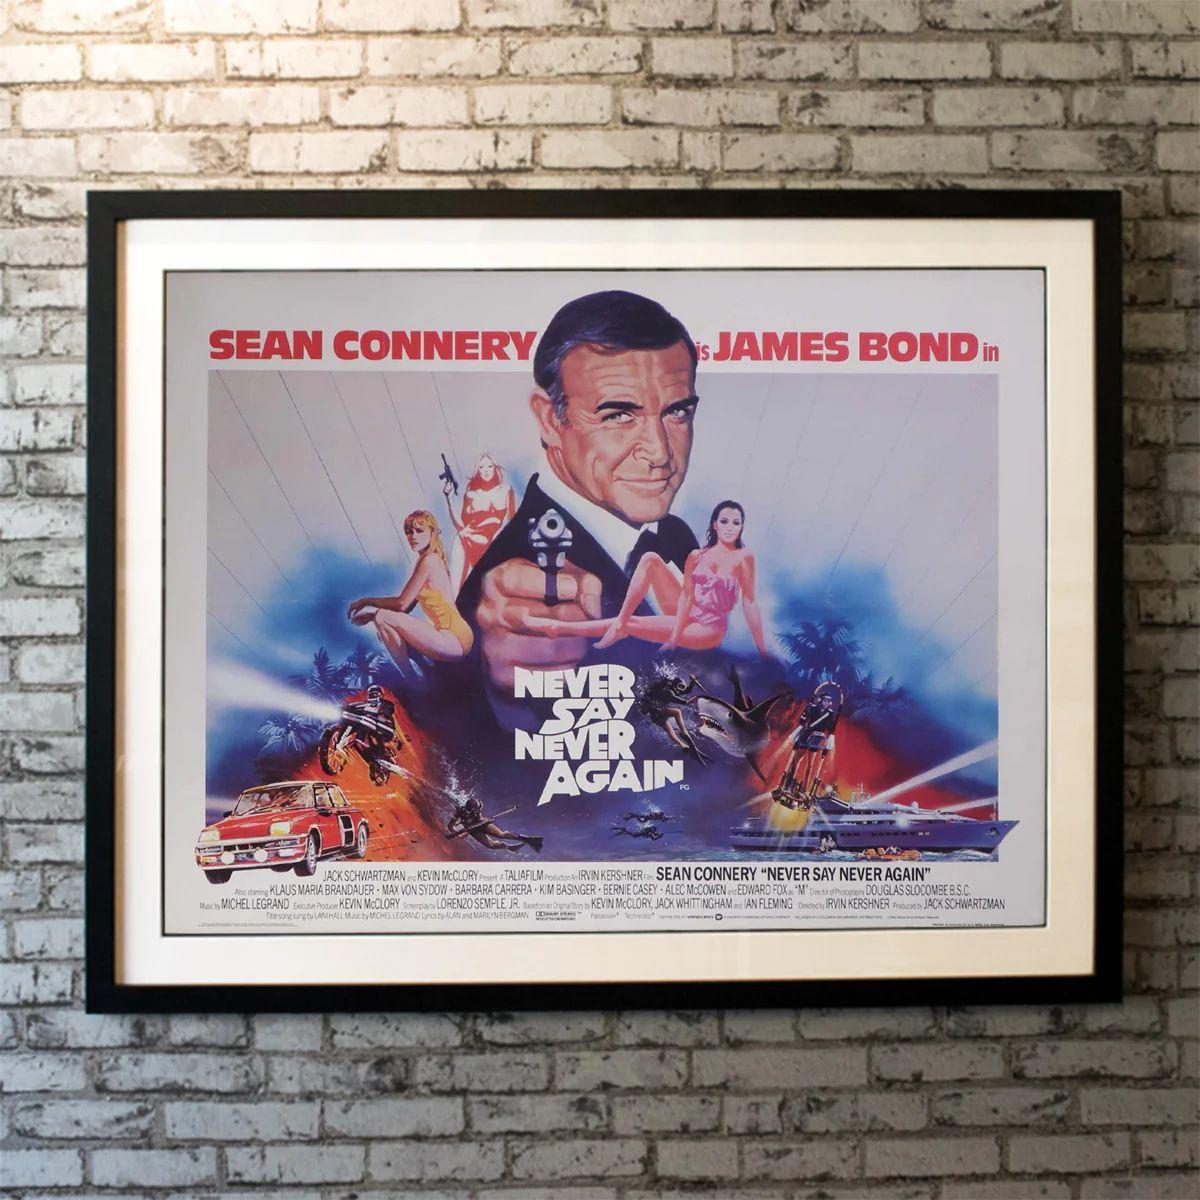 Never Say Never Again, Unframed Poster, 1982

Original British Quad (30 X 40 Inches). Released in the same year as Octopussy, this was the James Bond film that the Broccolis did not make. Mostly a remake of Thunderball, it was notable for the return